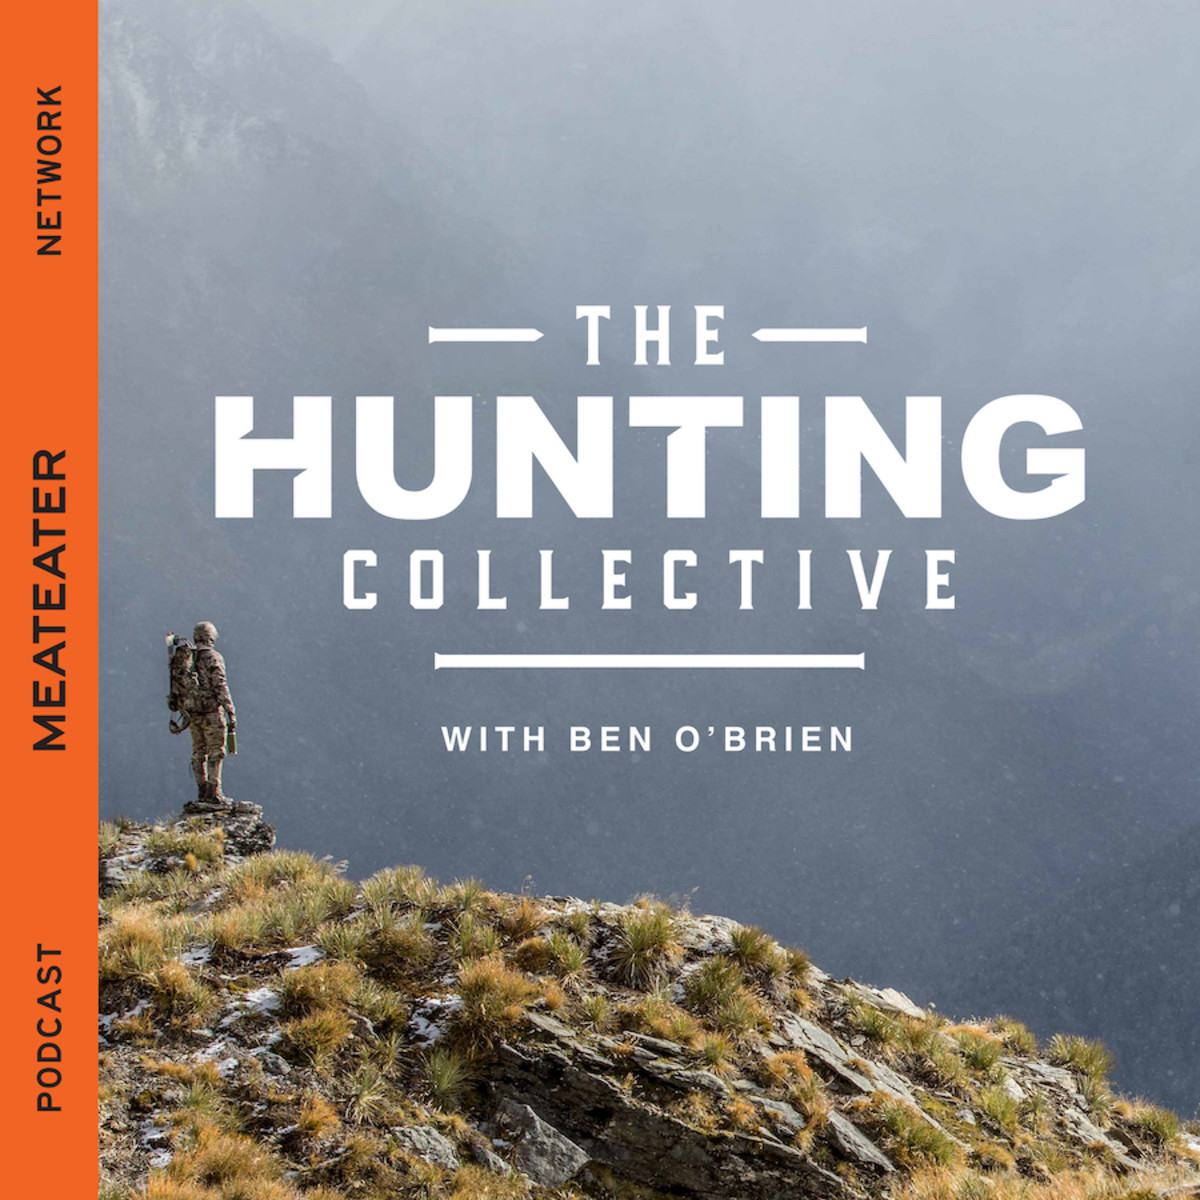 Ep. 89: Hunting While Black and Questioning Our Cultural Competency with Dr. Carolyn Finney